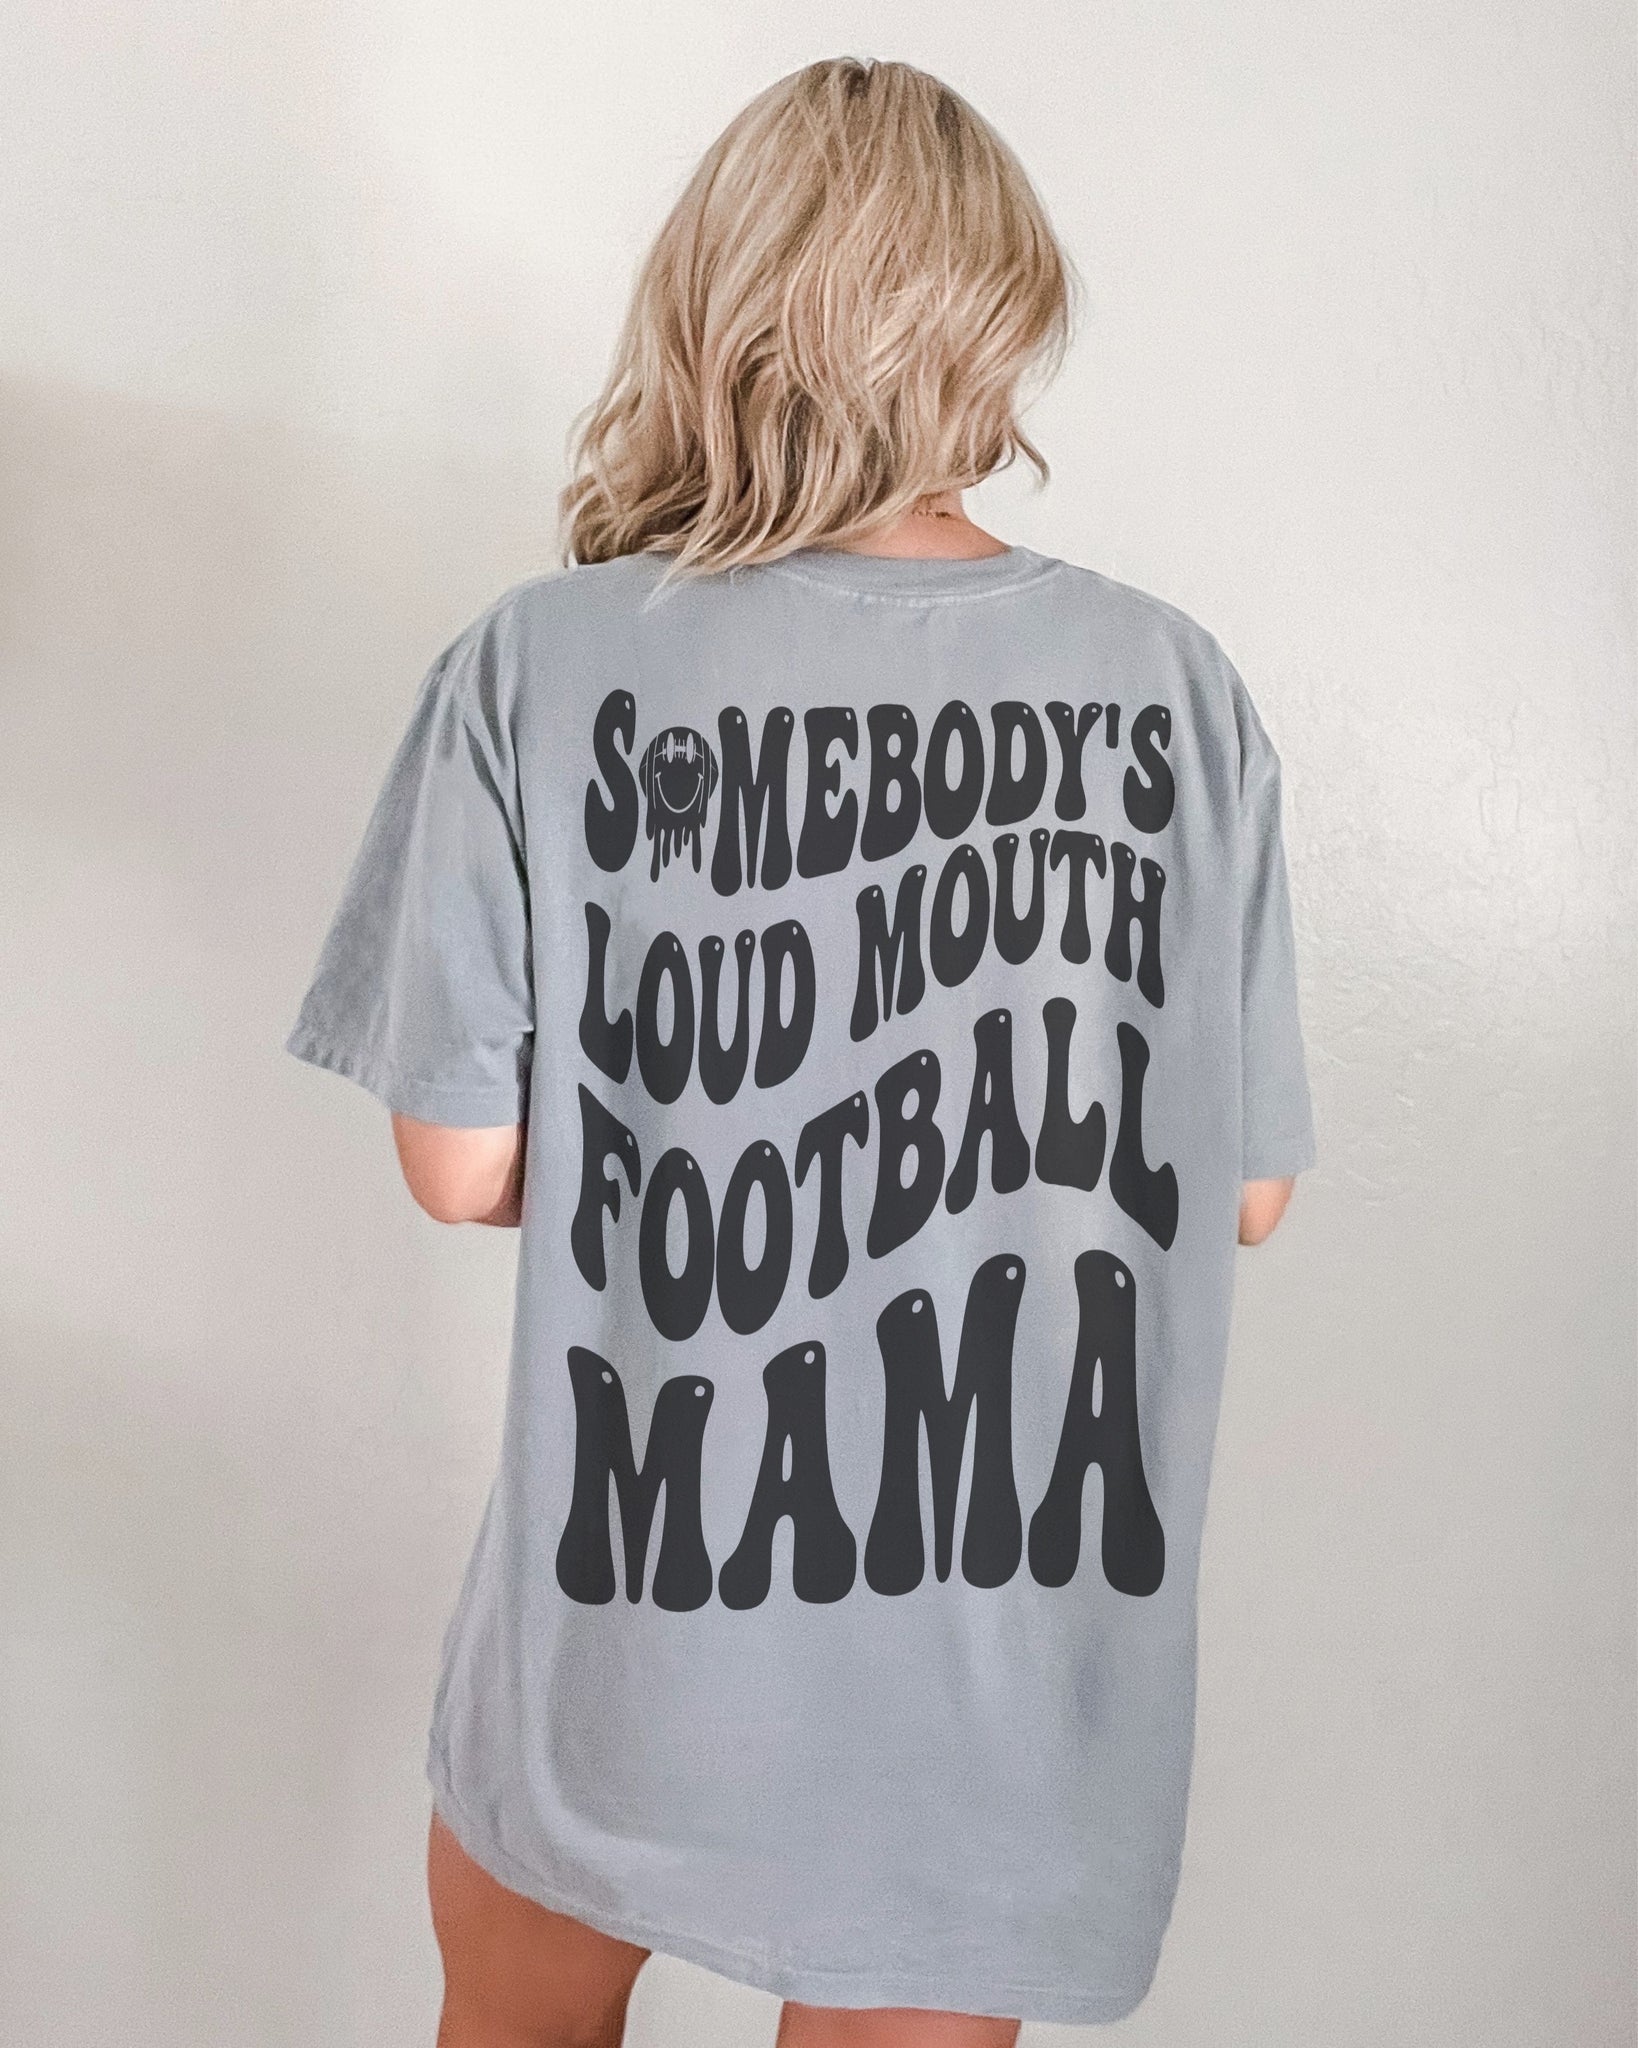 Retro Football Mom Shirt Somebody's Loud Mouth Football -  in 2023